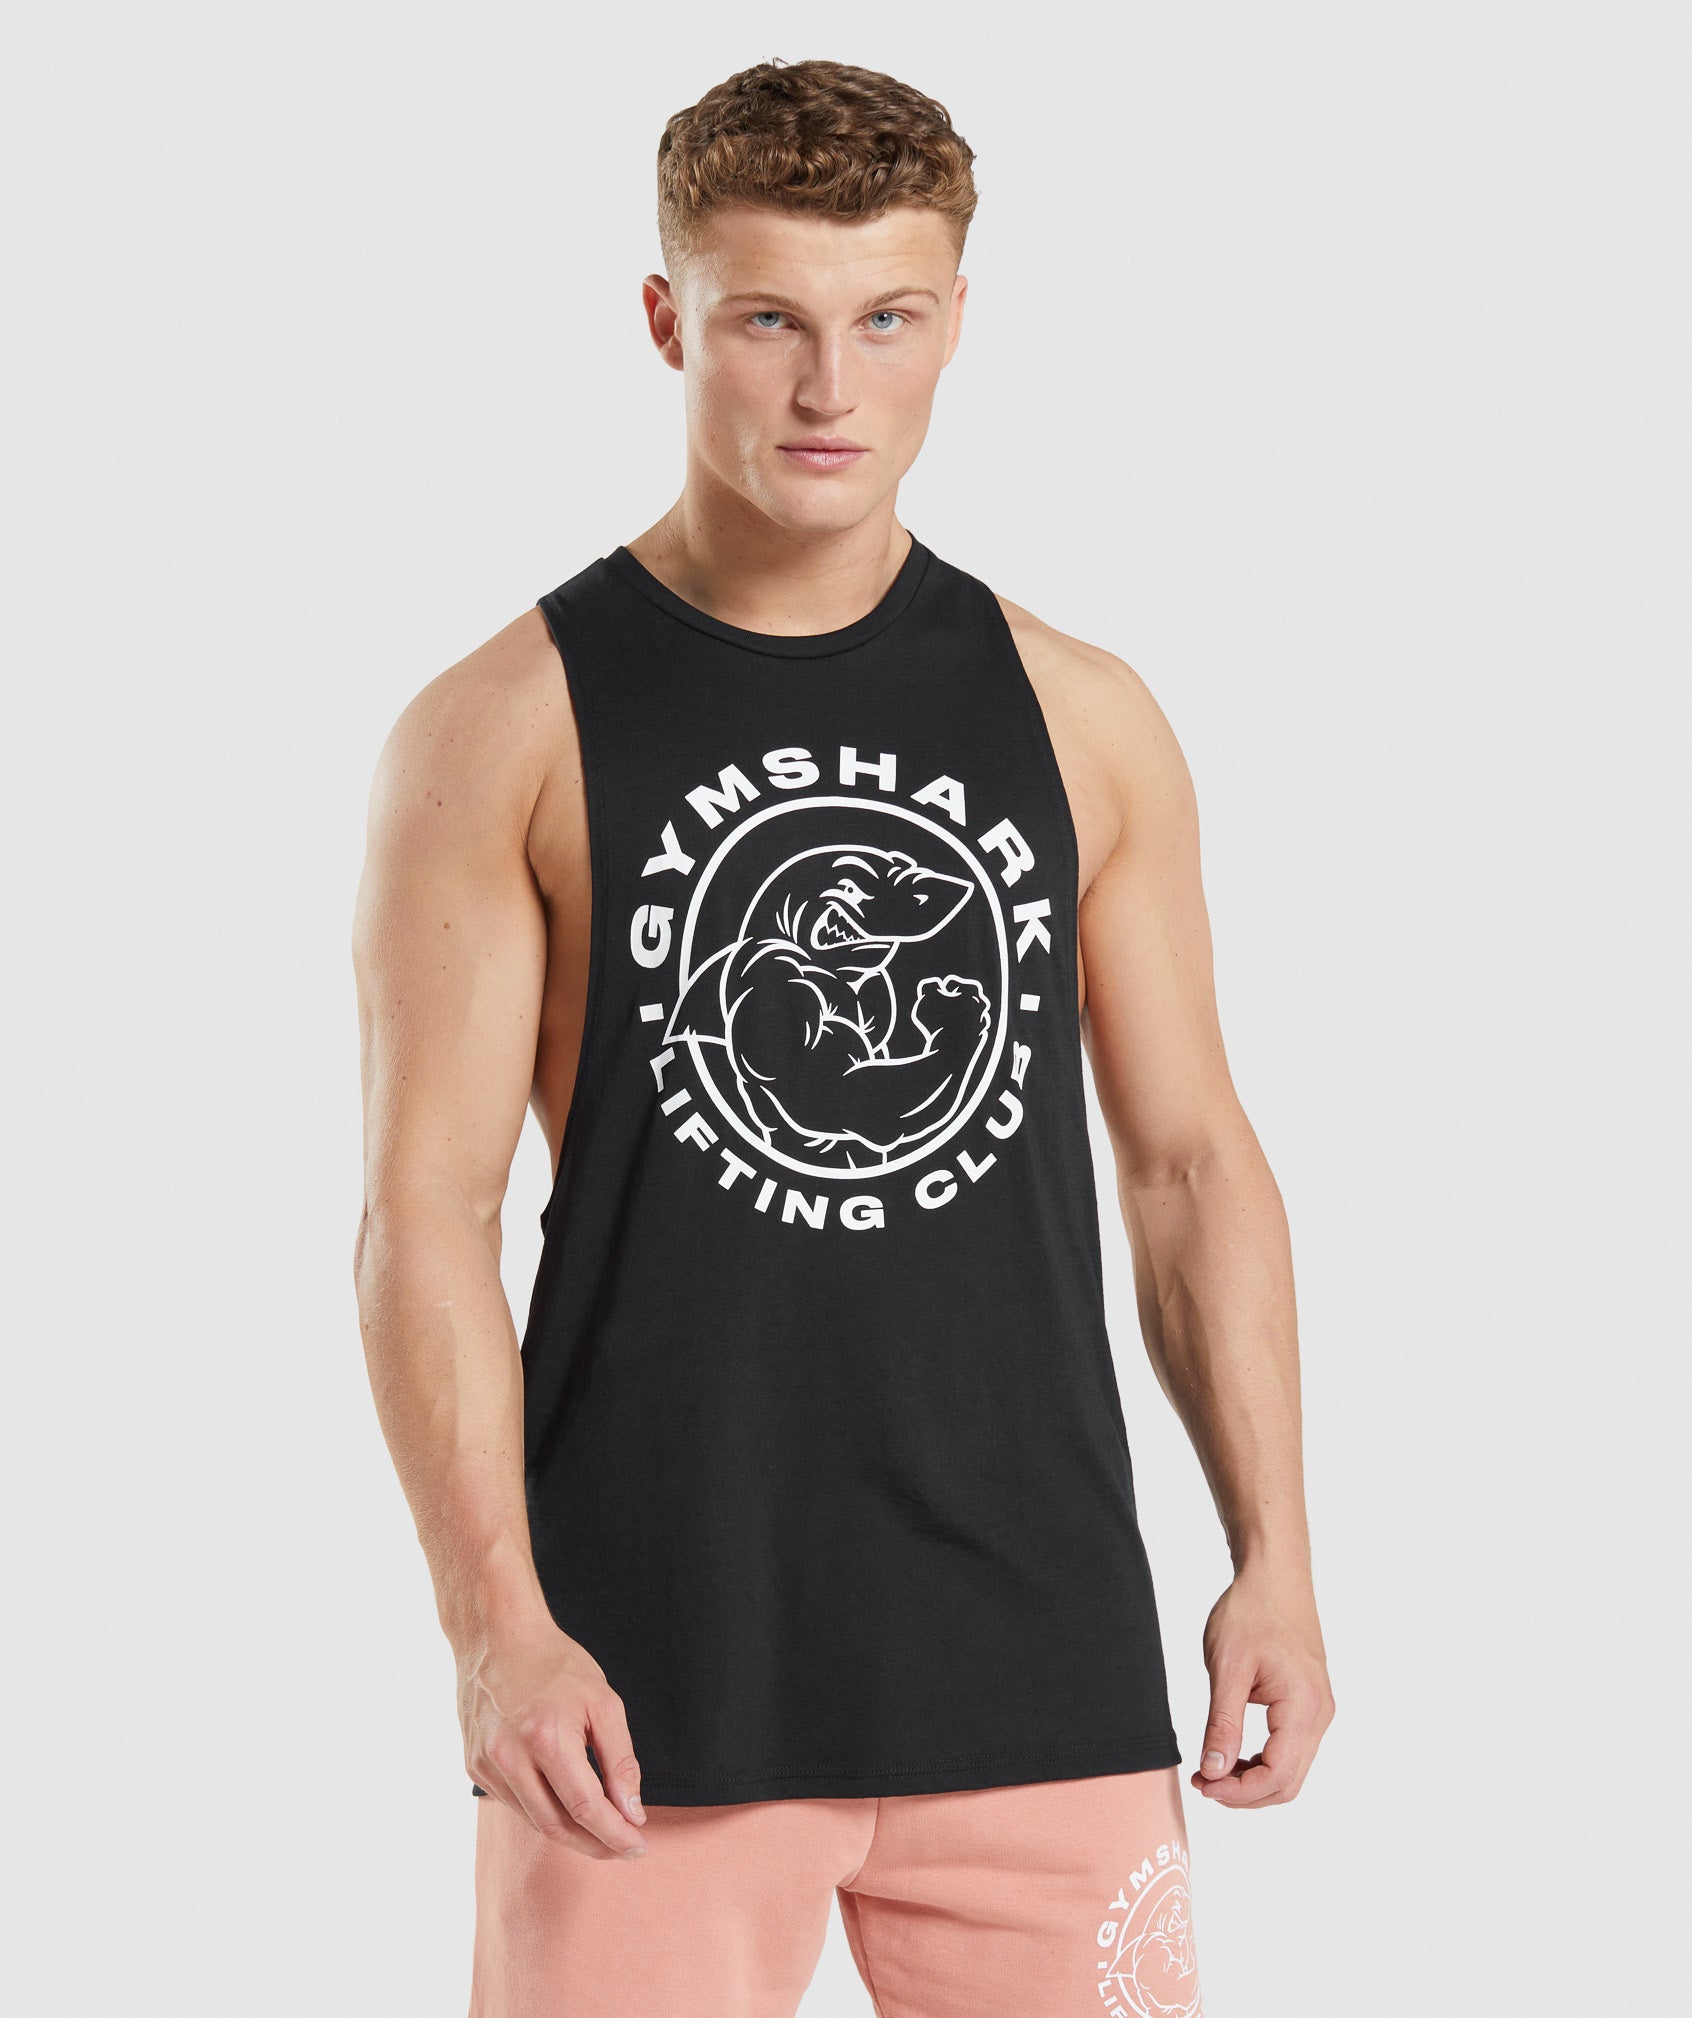 Gymshark Muscle Tank Black Size XS - $21 (47% Off Retail) - From